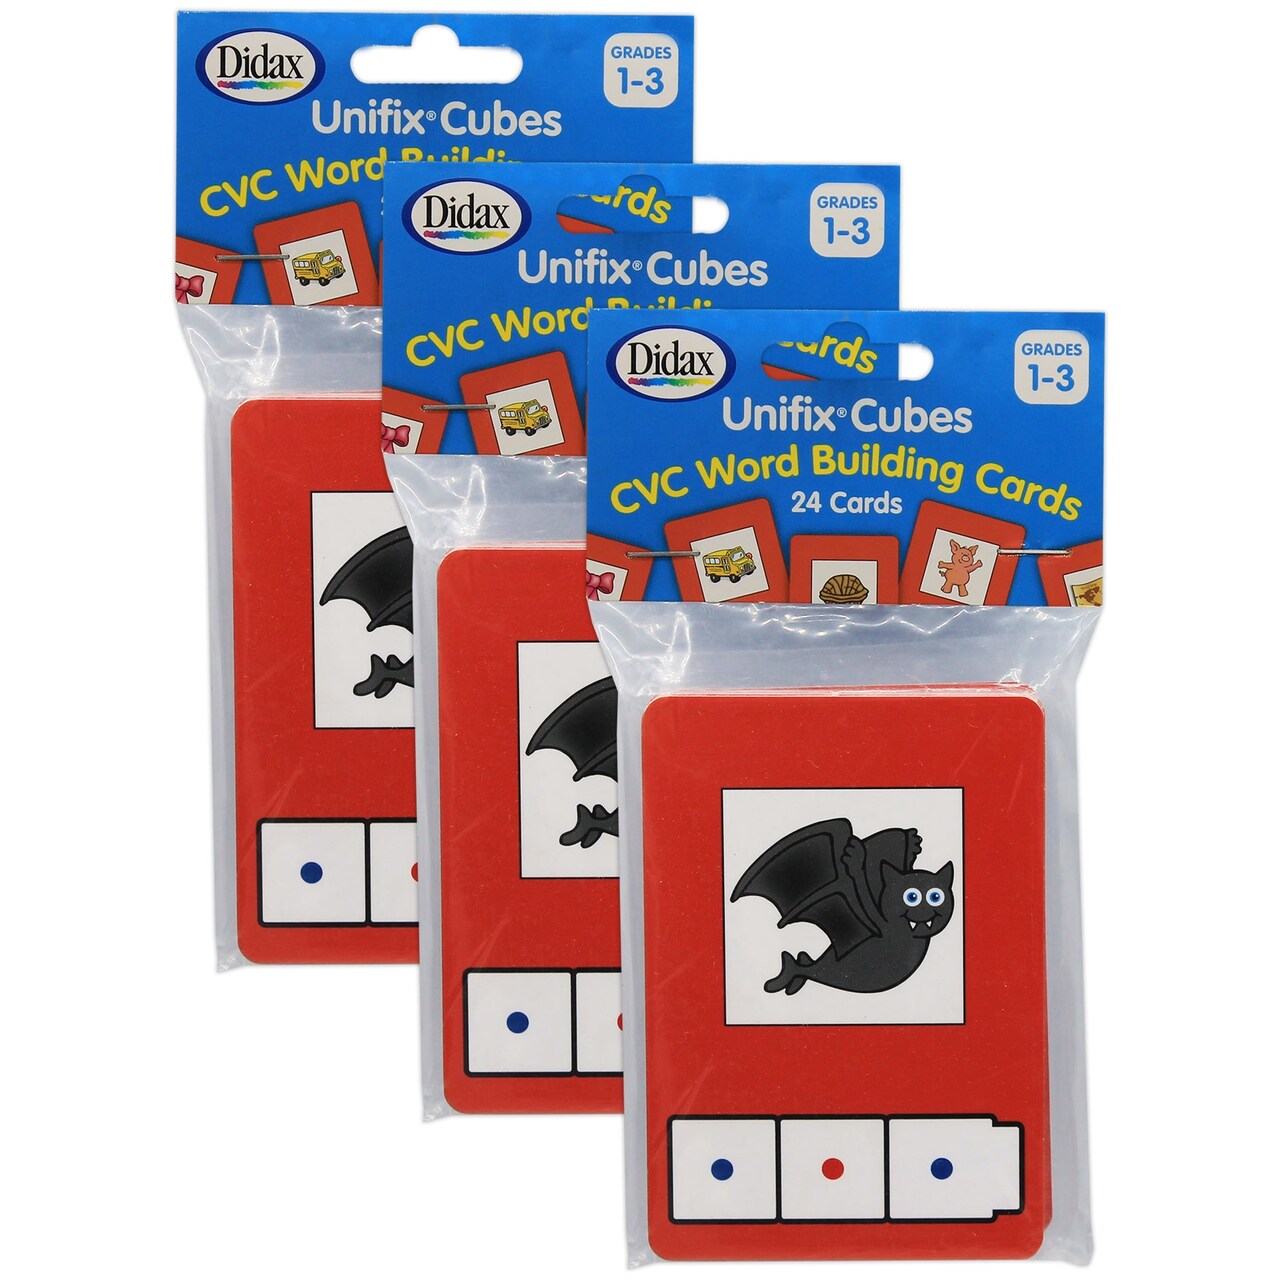 CVC Word Building Cards, 24 Cards Per Pack, 3 Packs